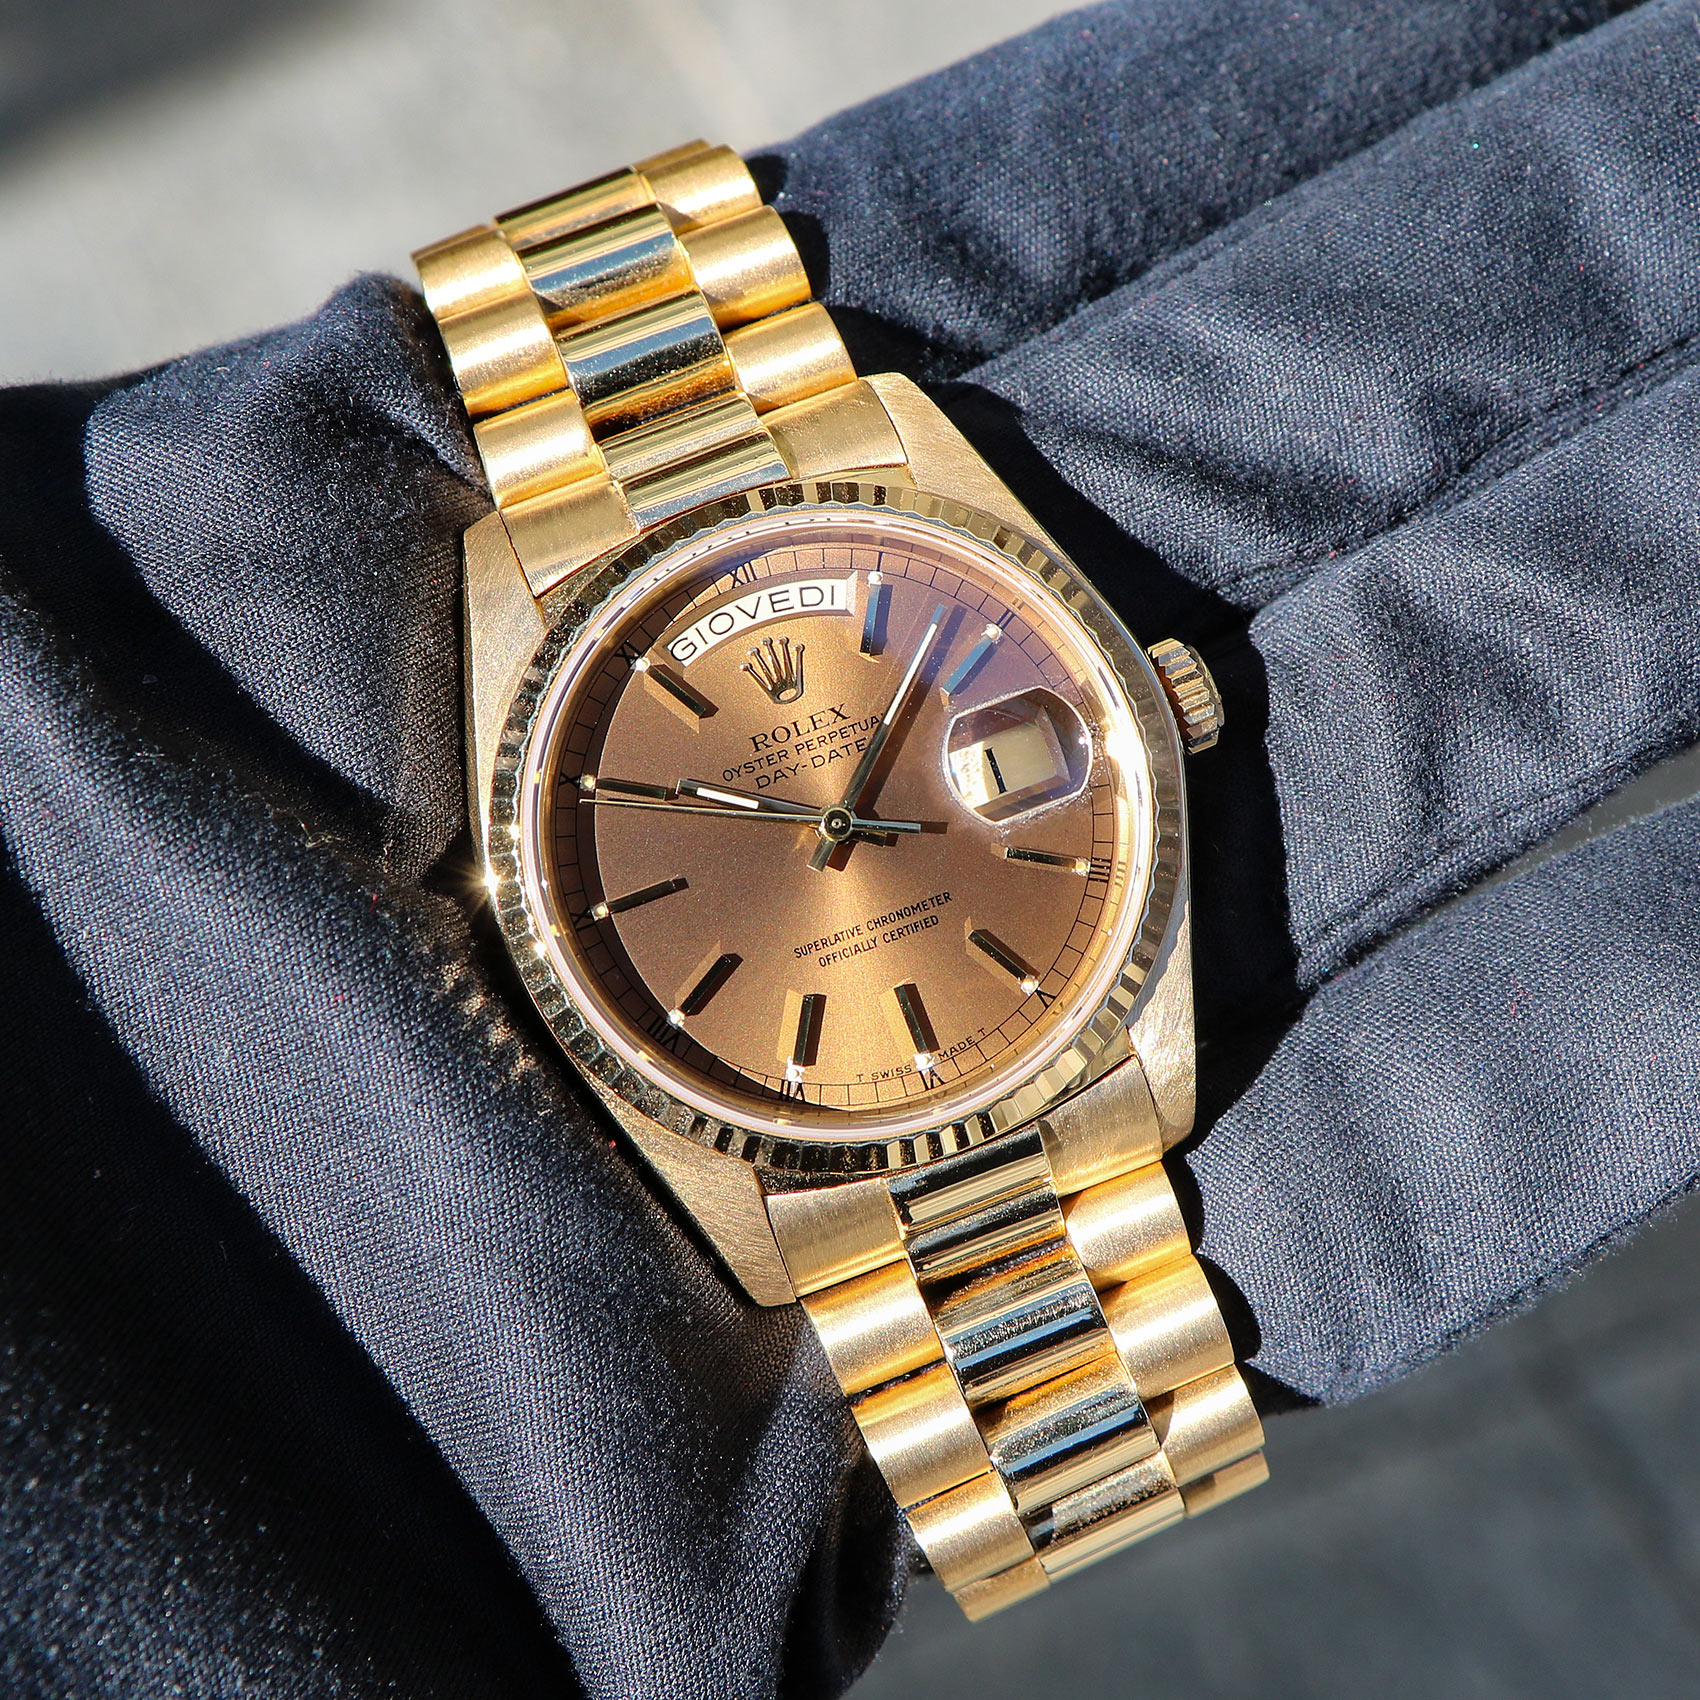 Rolex Day-Date 18kt Yellow Gold, ref.18038, Bronze Dial, from 1977